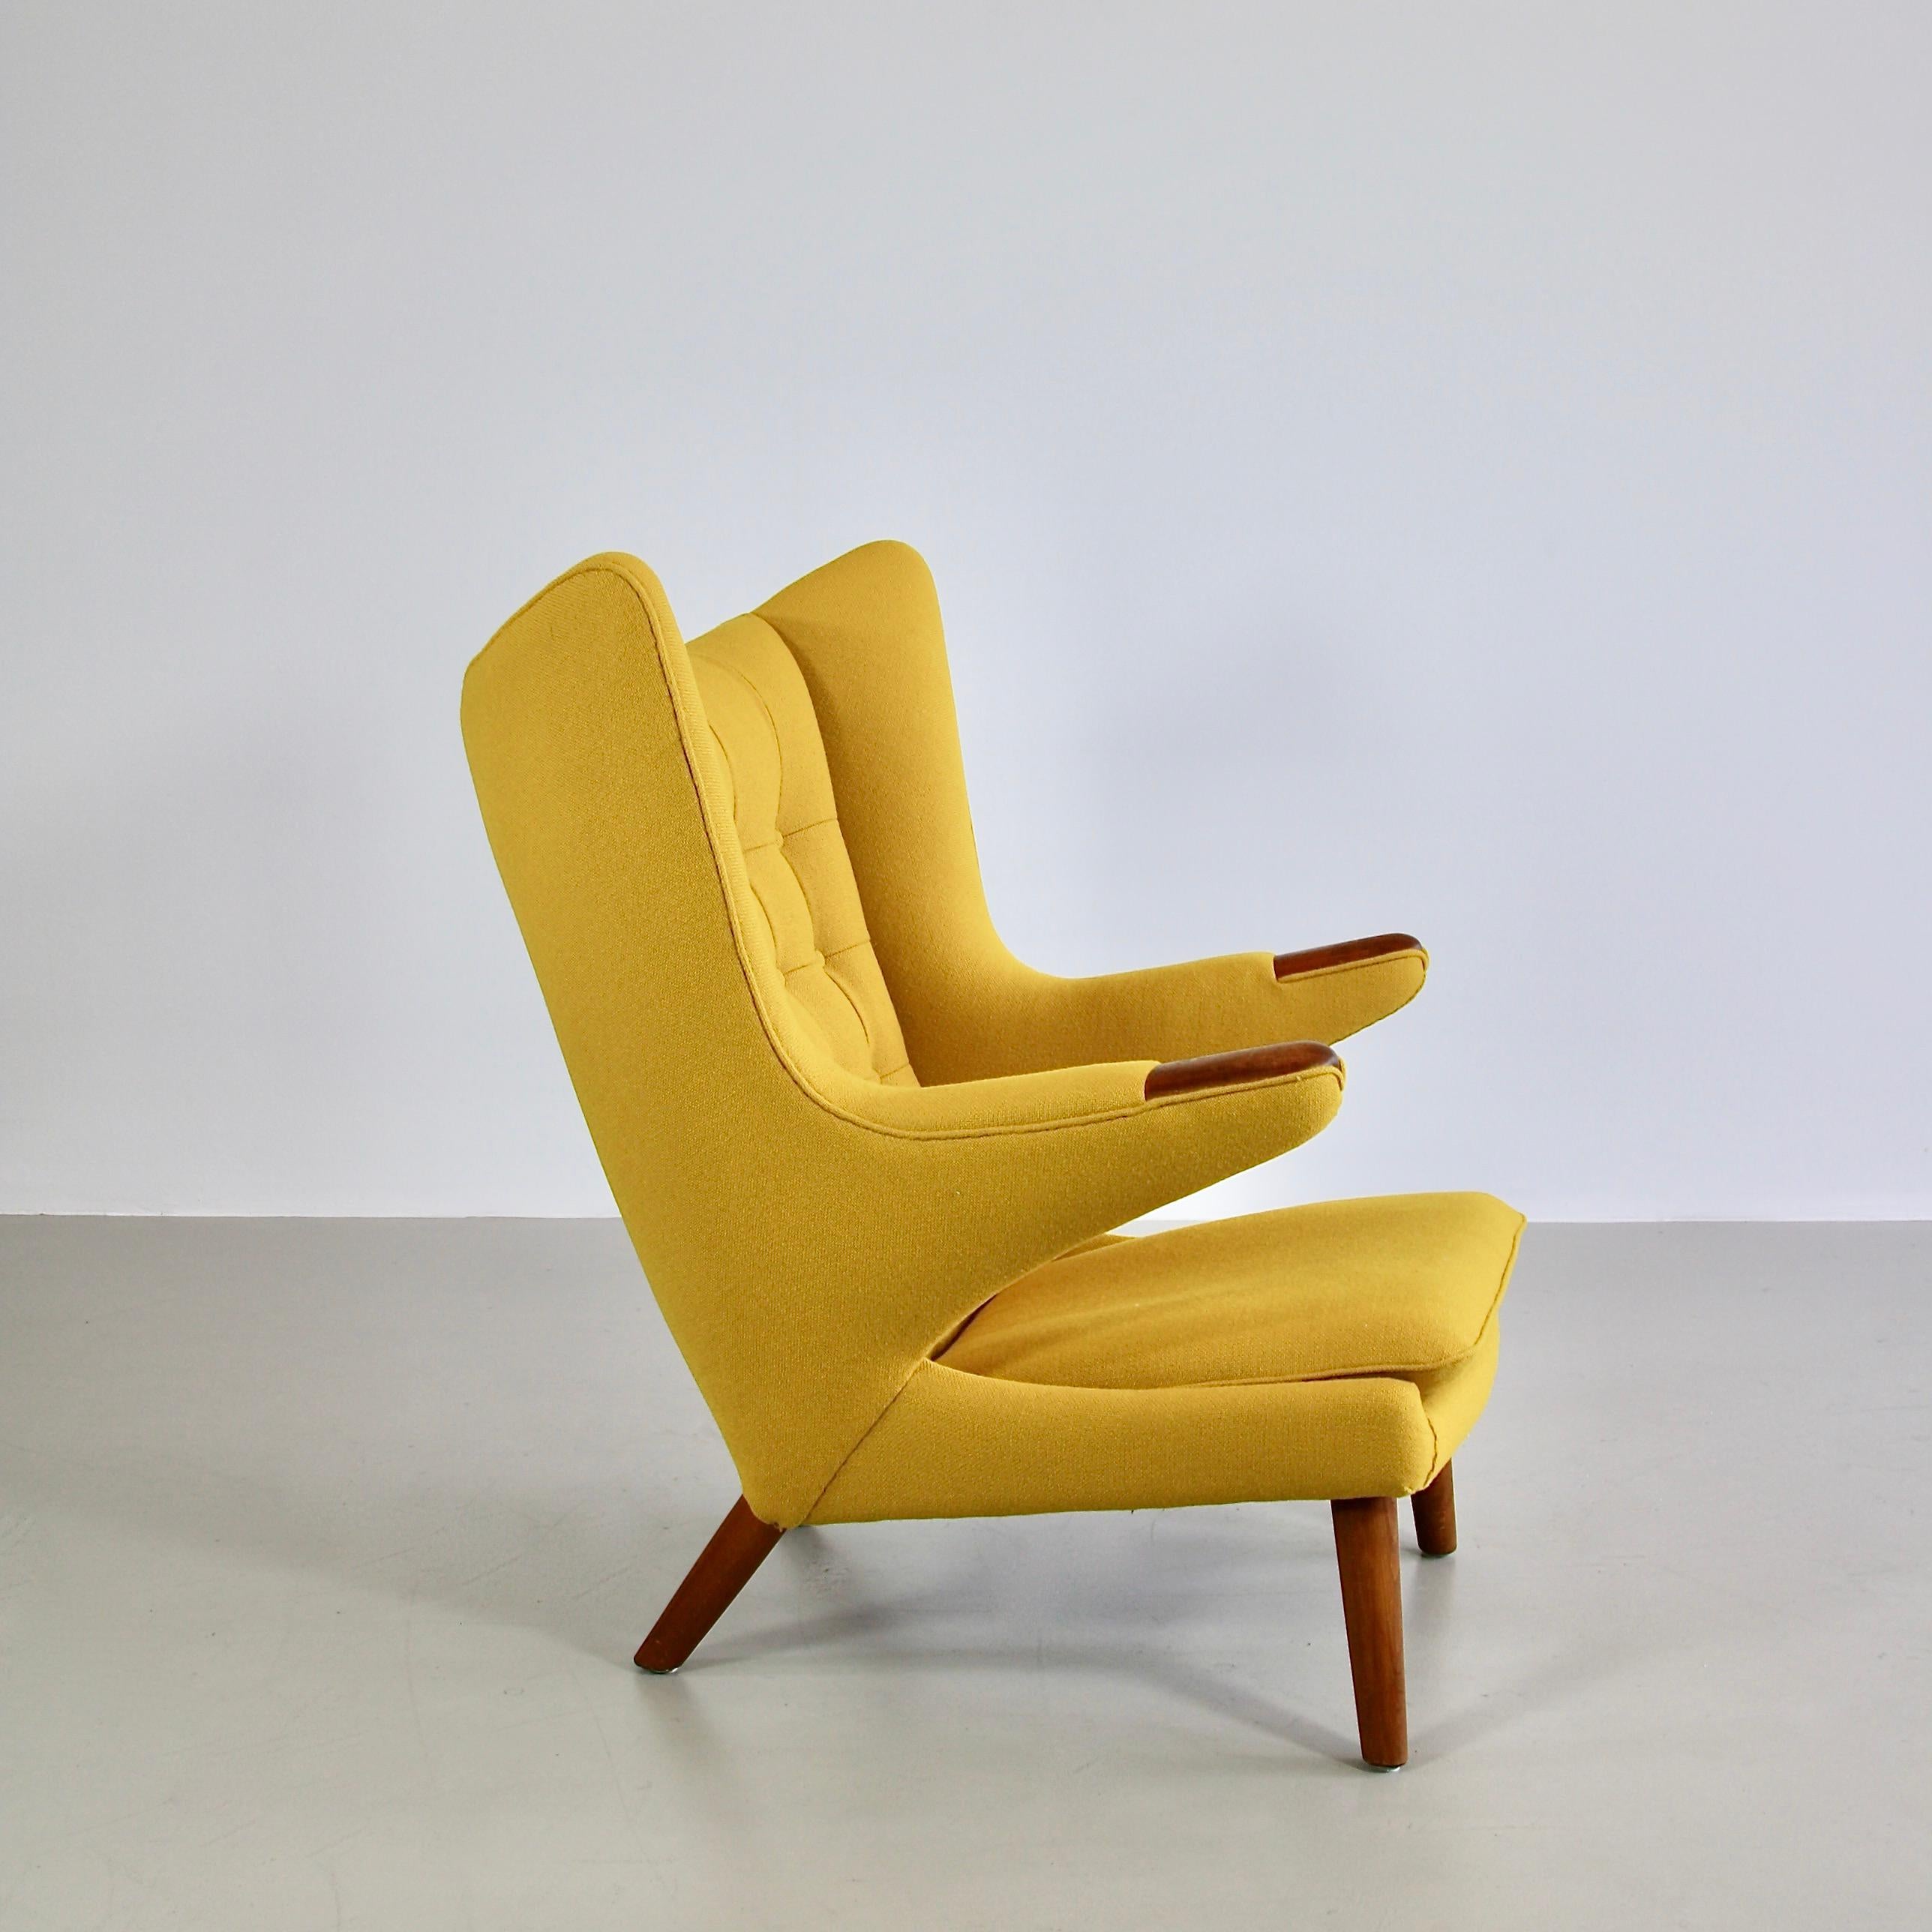 The Bamsestol (bear chair), known as the PAPA BEAR lounge chair designed by Hans J. Wegner. Denmark, A.P. Stolen, 1951.

Original edition. Solid wooden construction with oak paws and new yellow Kvadrat upholstery. A very good vintage chair with